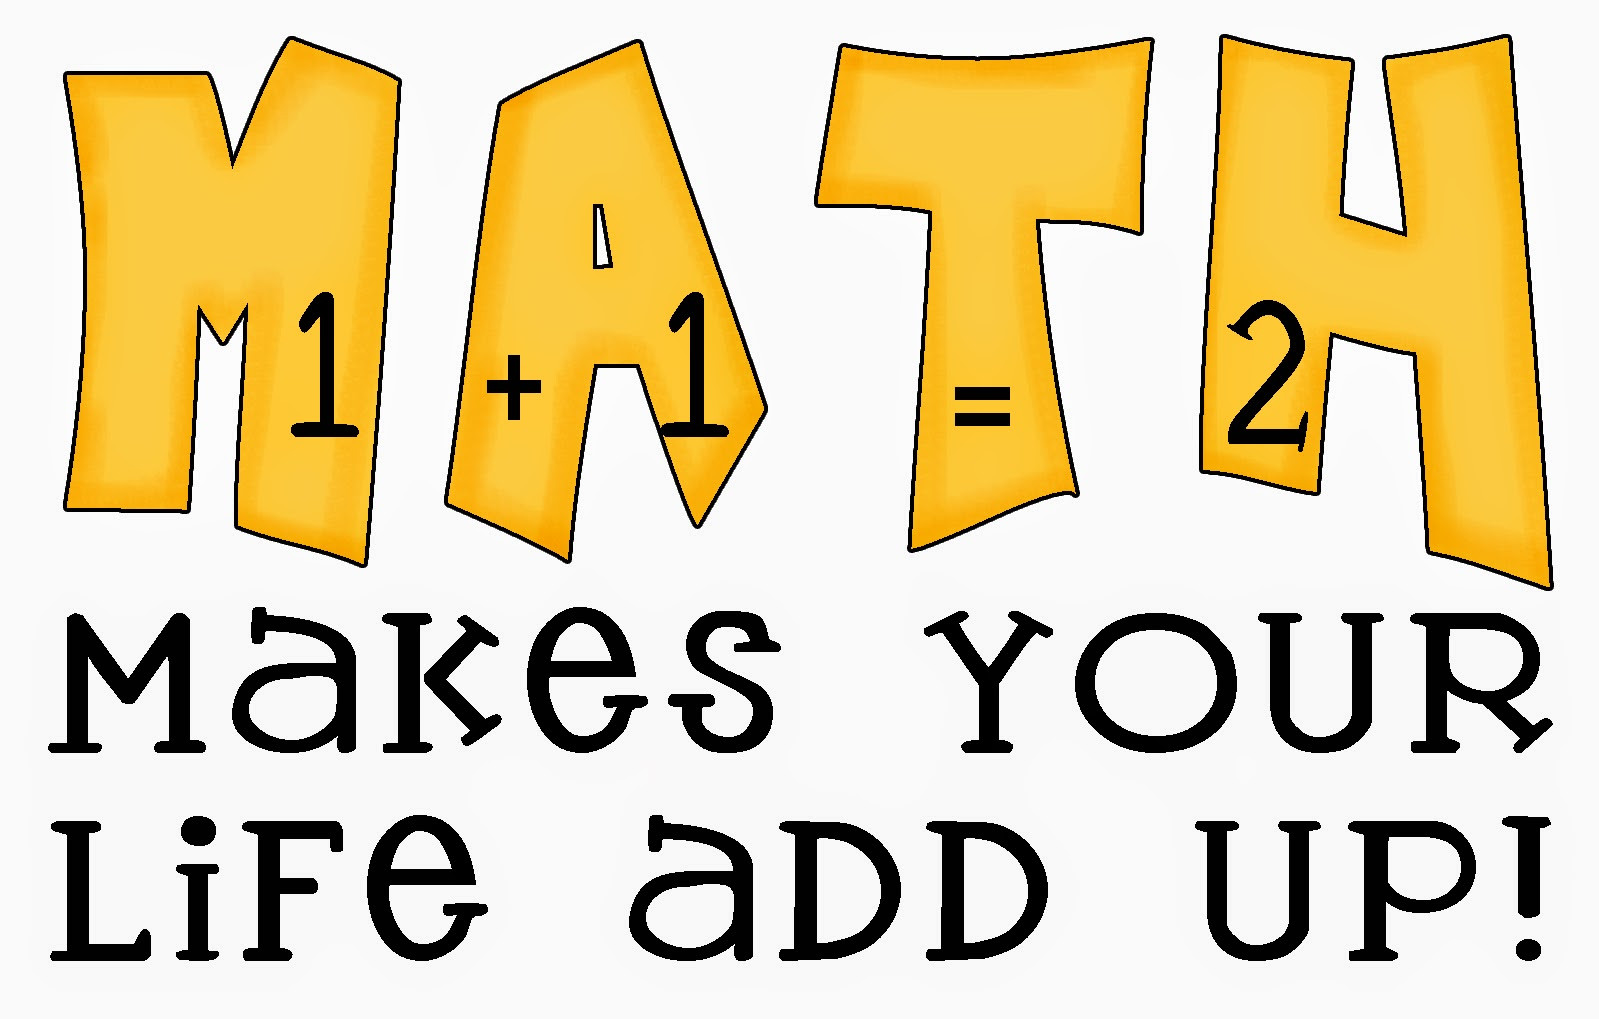 Mathematics Quotes For Kids
 MATH QUOTES image quotes at hippoquotes